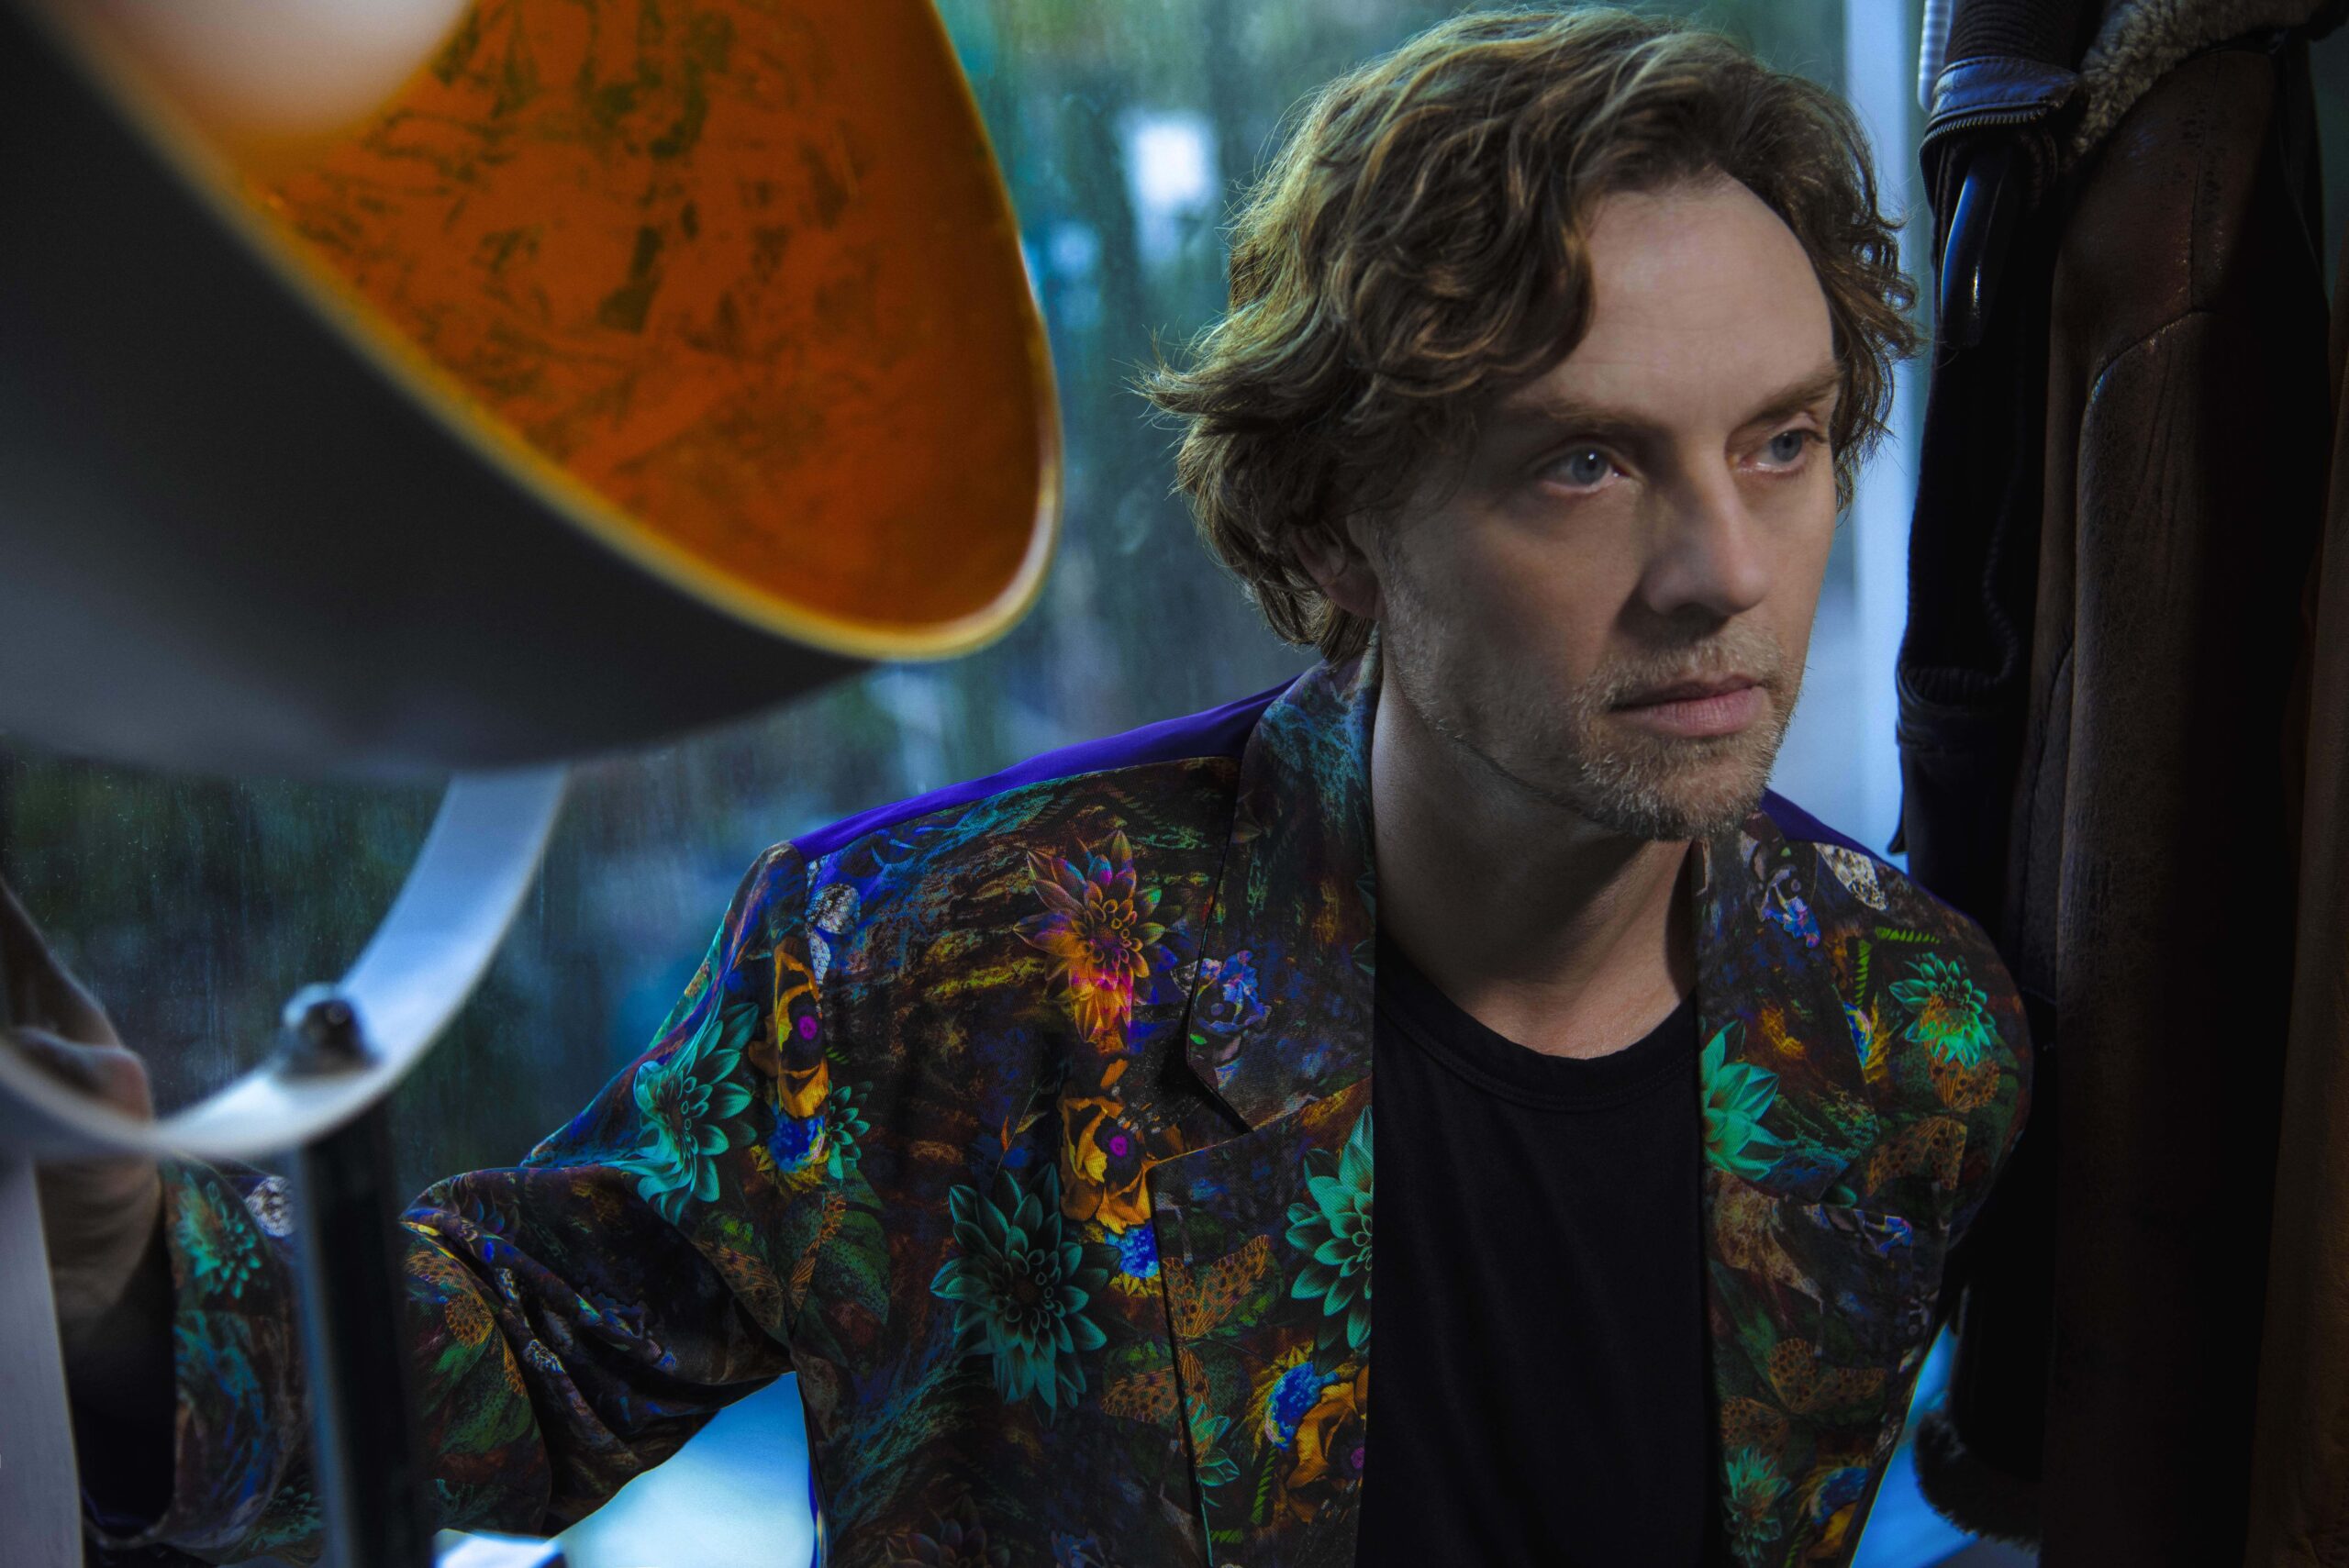 DARREN HAYES UNVEILS HIS MOST RAW AND HONEST MUSIC TO DATE ‘POISON BLOOD’